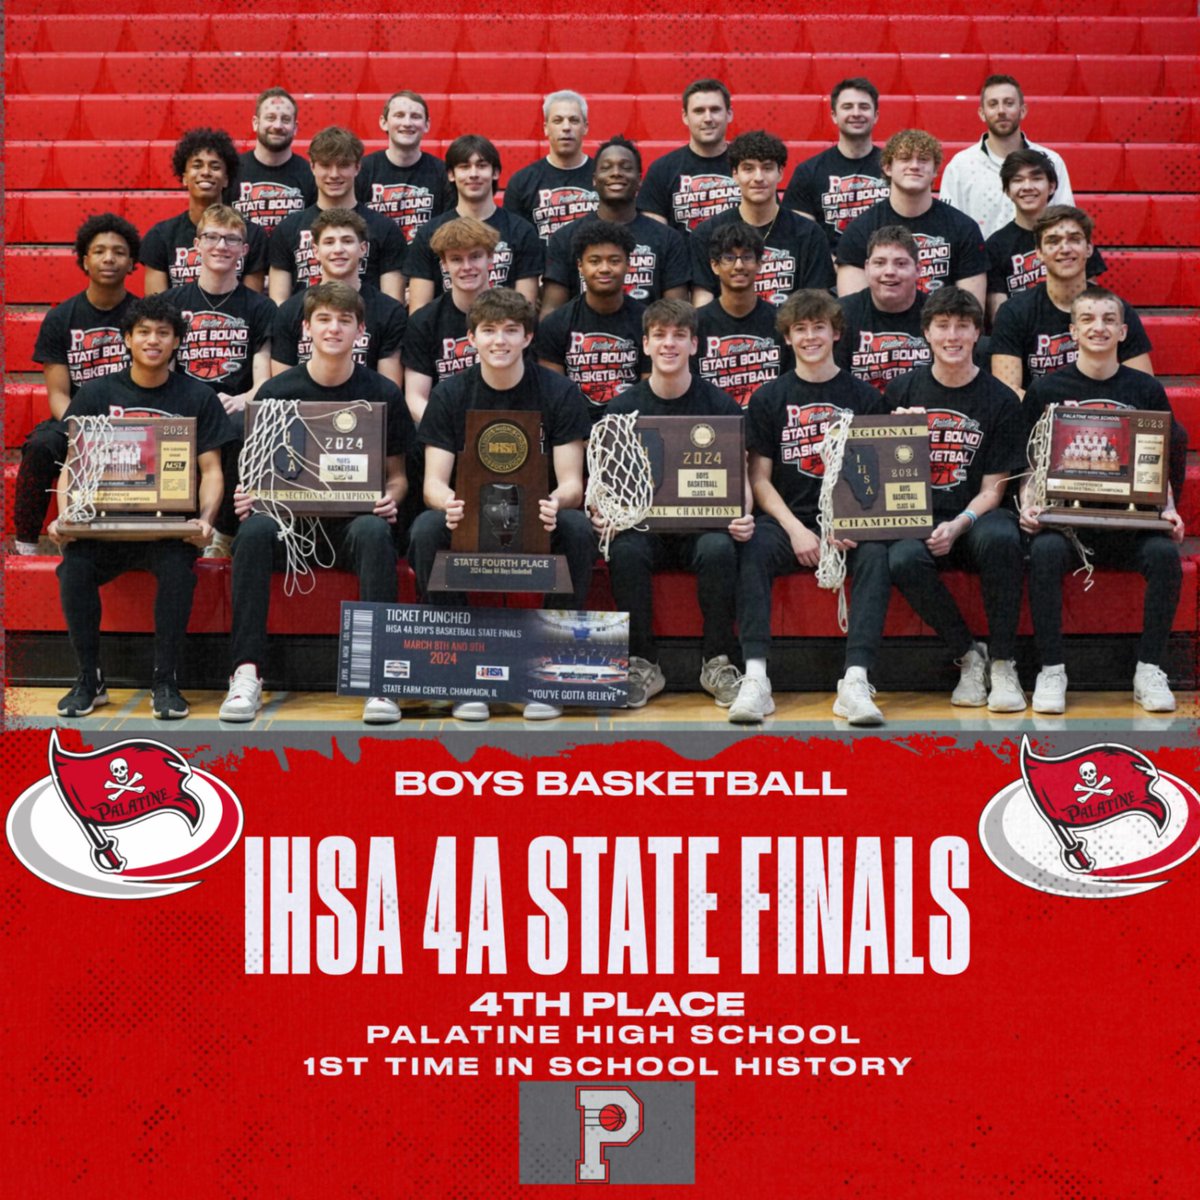 Coach Millstone and the Boys Basketball Team have made us so proud. What a historic run! 1st time in school history! Congratulations on 4th place in the state. The community has rallied around this great team to witness a magical moment, the school spirit was great! GO PIRATES!